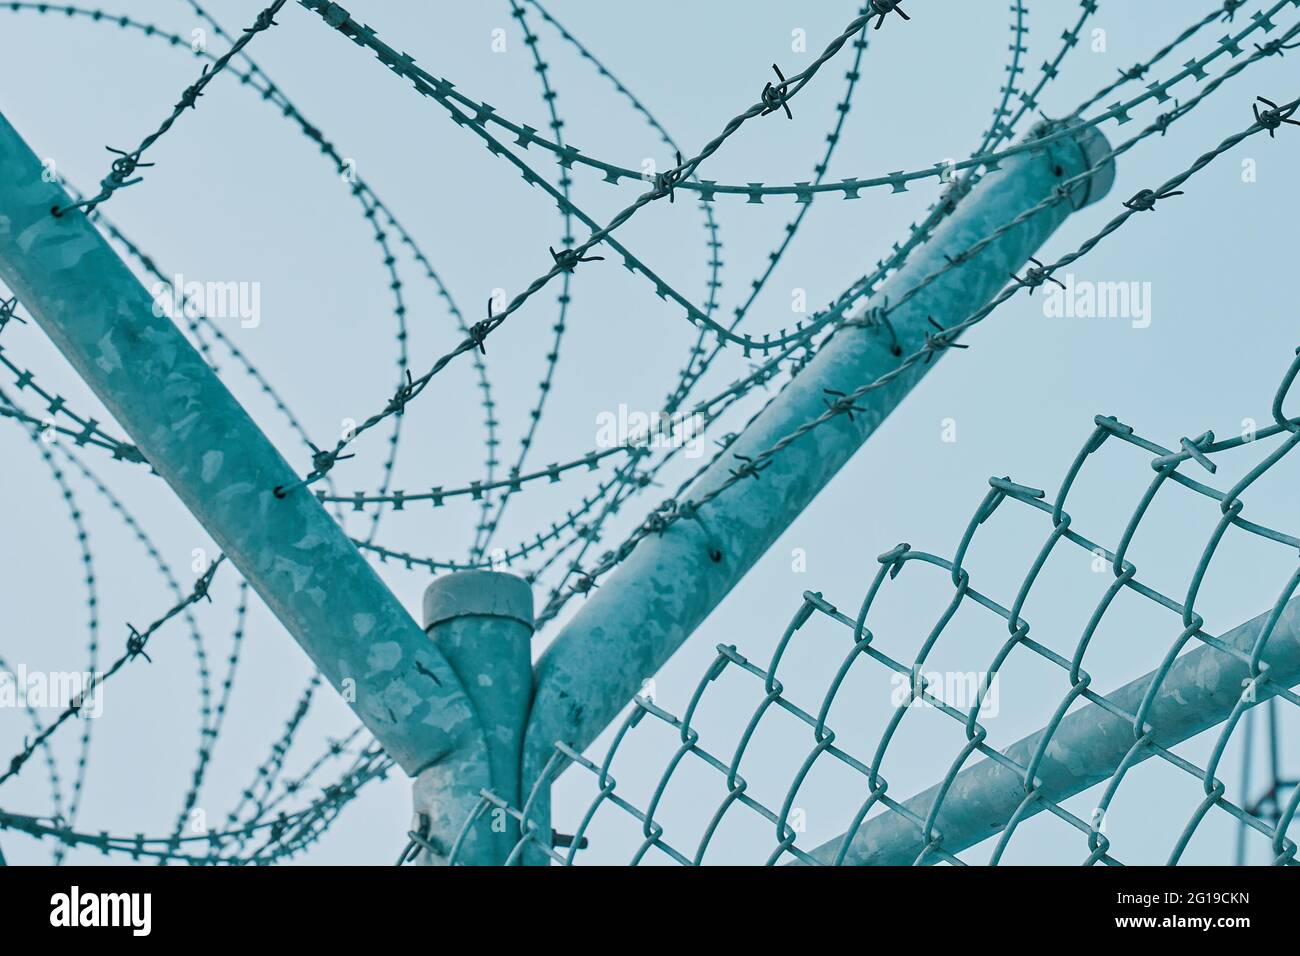 Barbed wire. Restricted area. Prison fence with metal cables with spikes.  Stock Photo